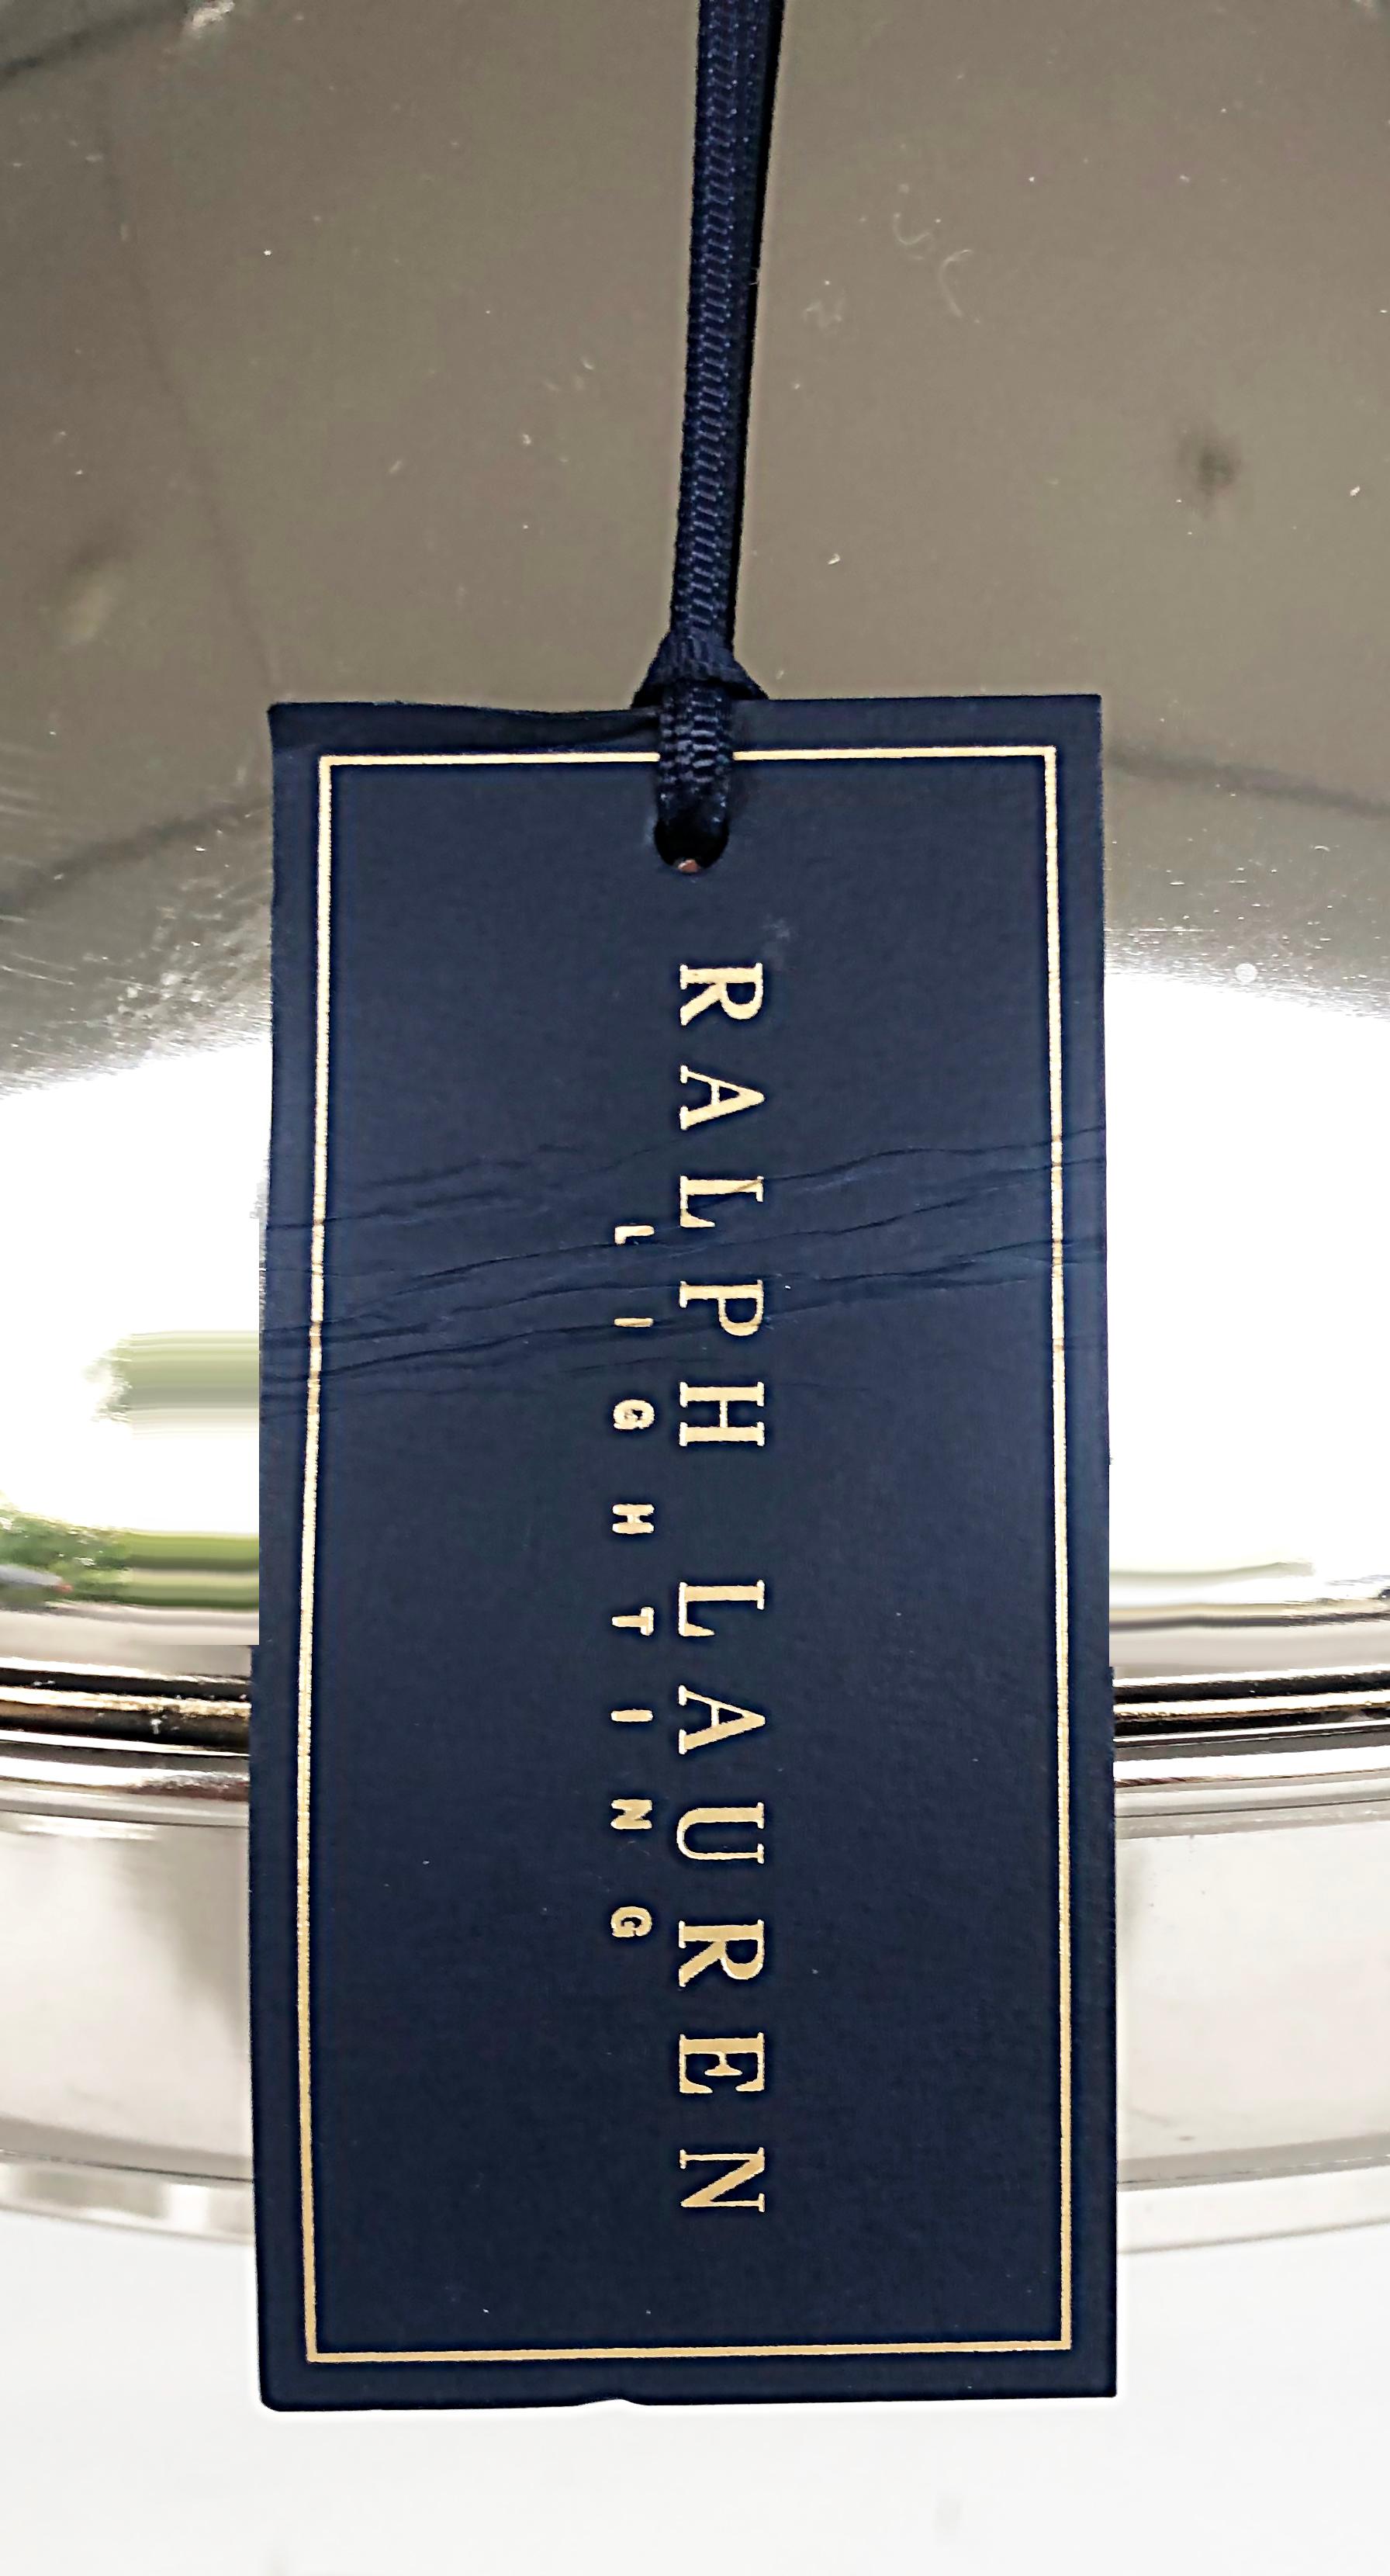 Polished New Ralph Lauren Nickel Montauk Pendant Light Fixture with Canopy For Sale